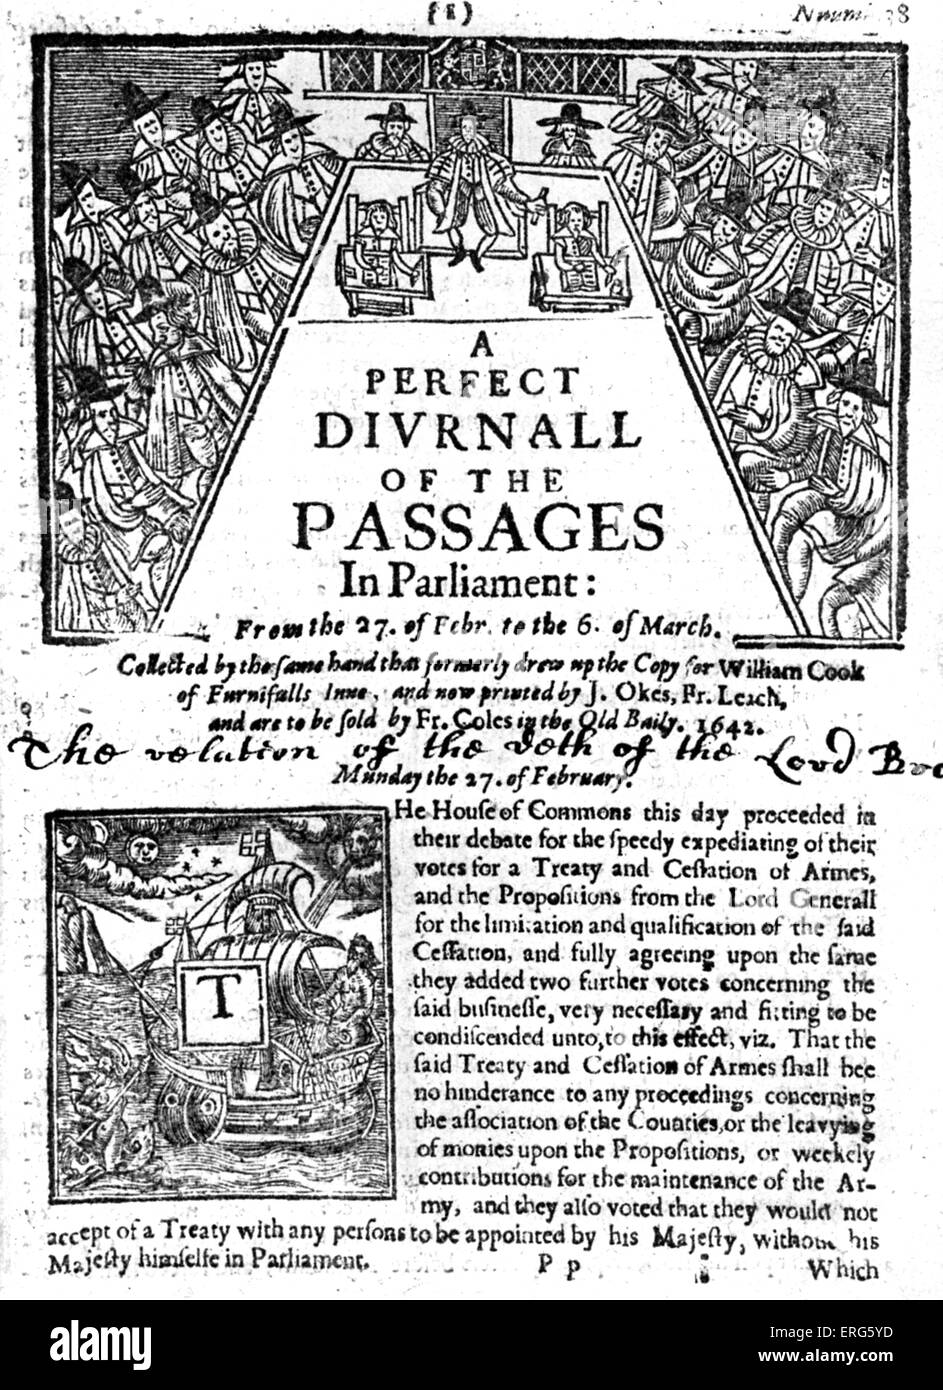 A Perfect Diurnal of the Passages in Parliament - front page, February 1642. English newspaper. Stock Photo